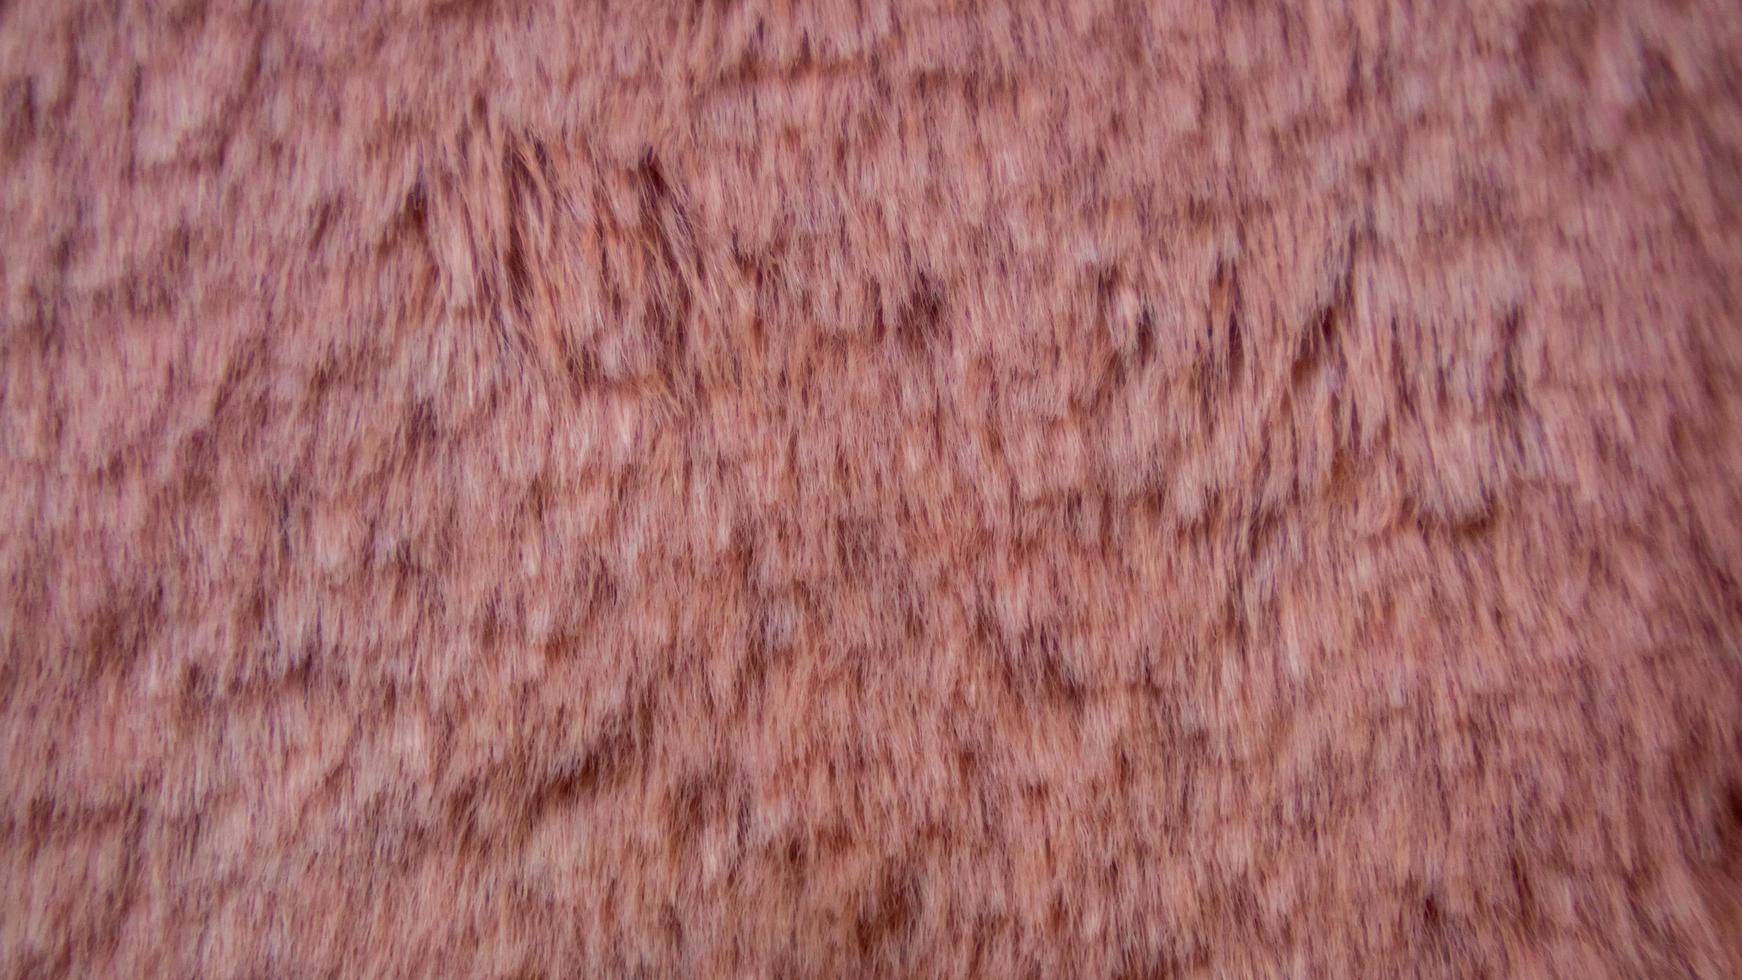 pink wool texture as a background photo